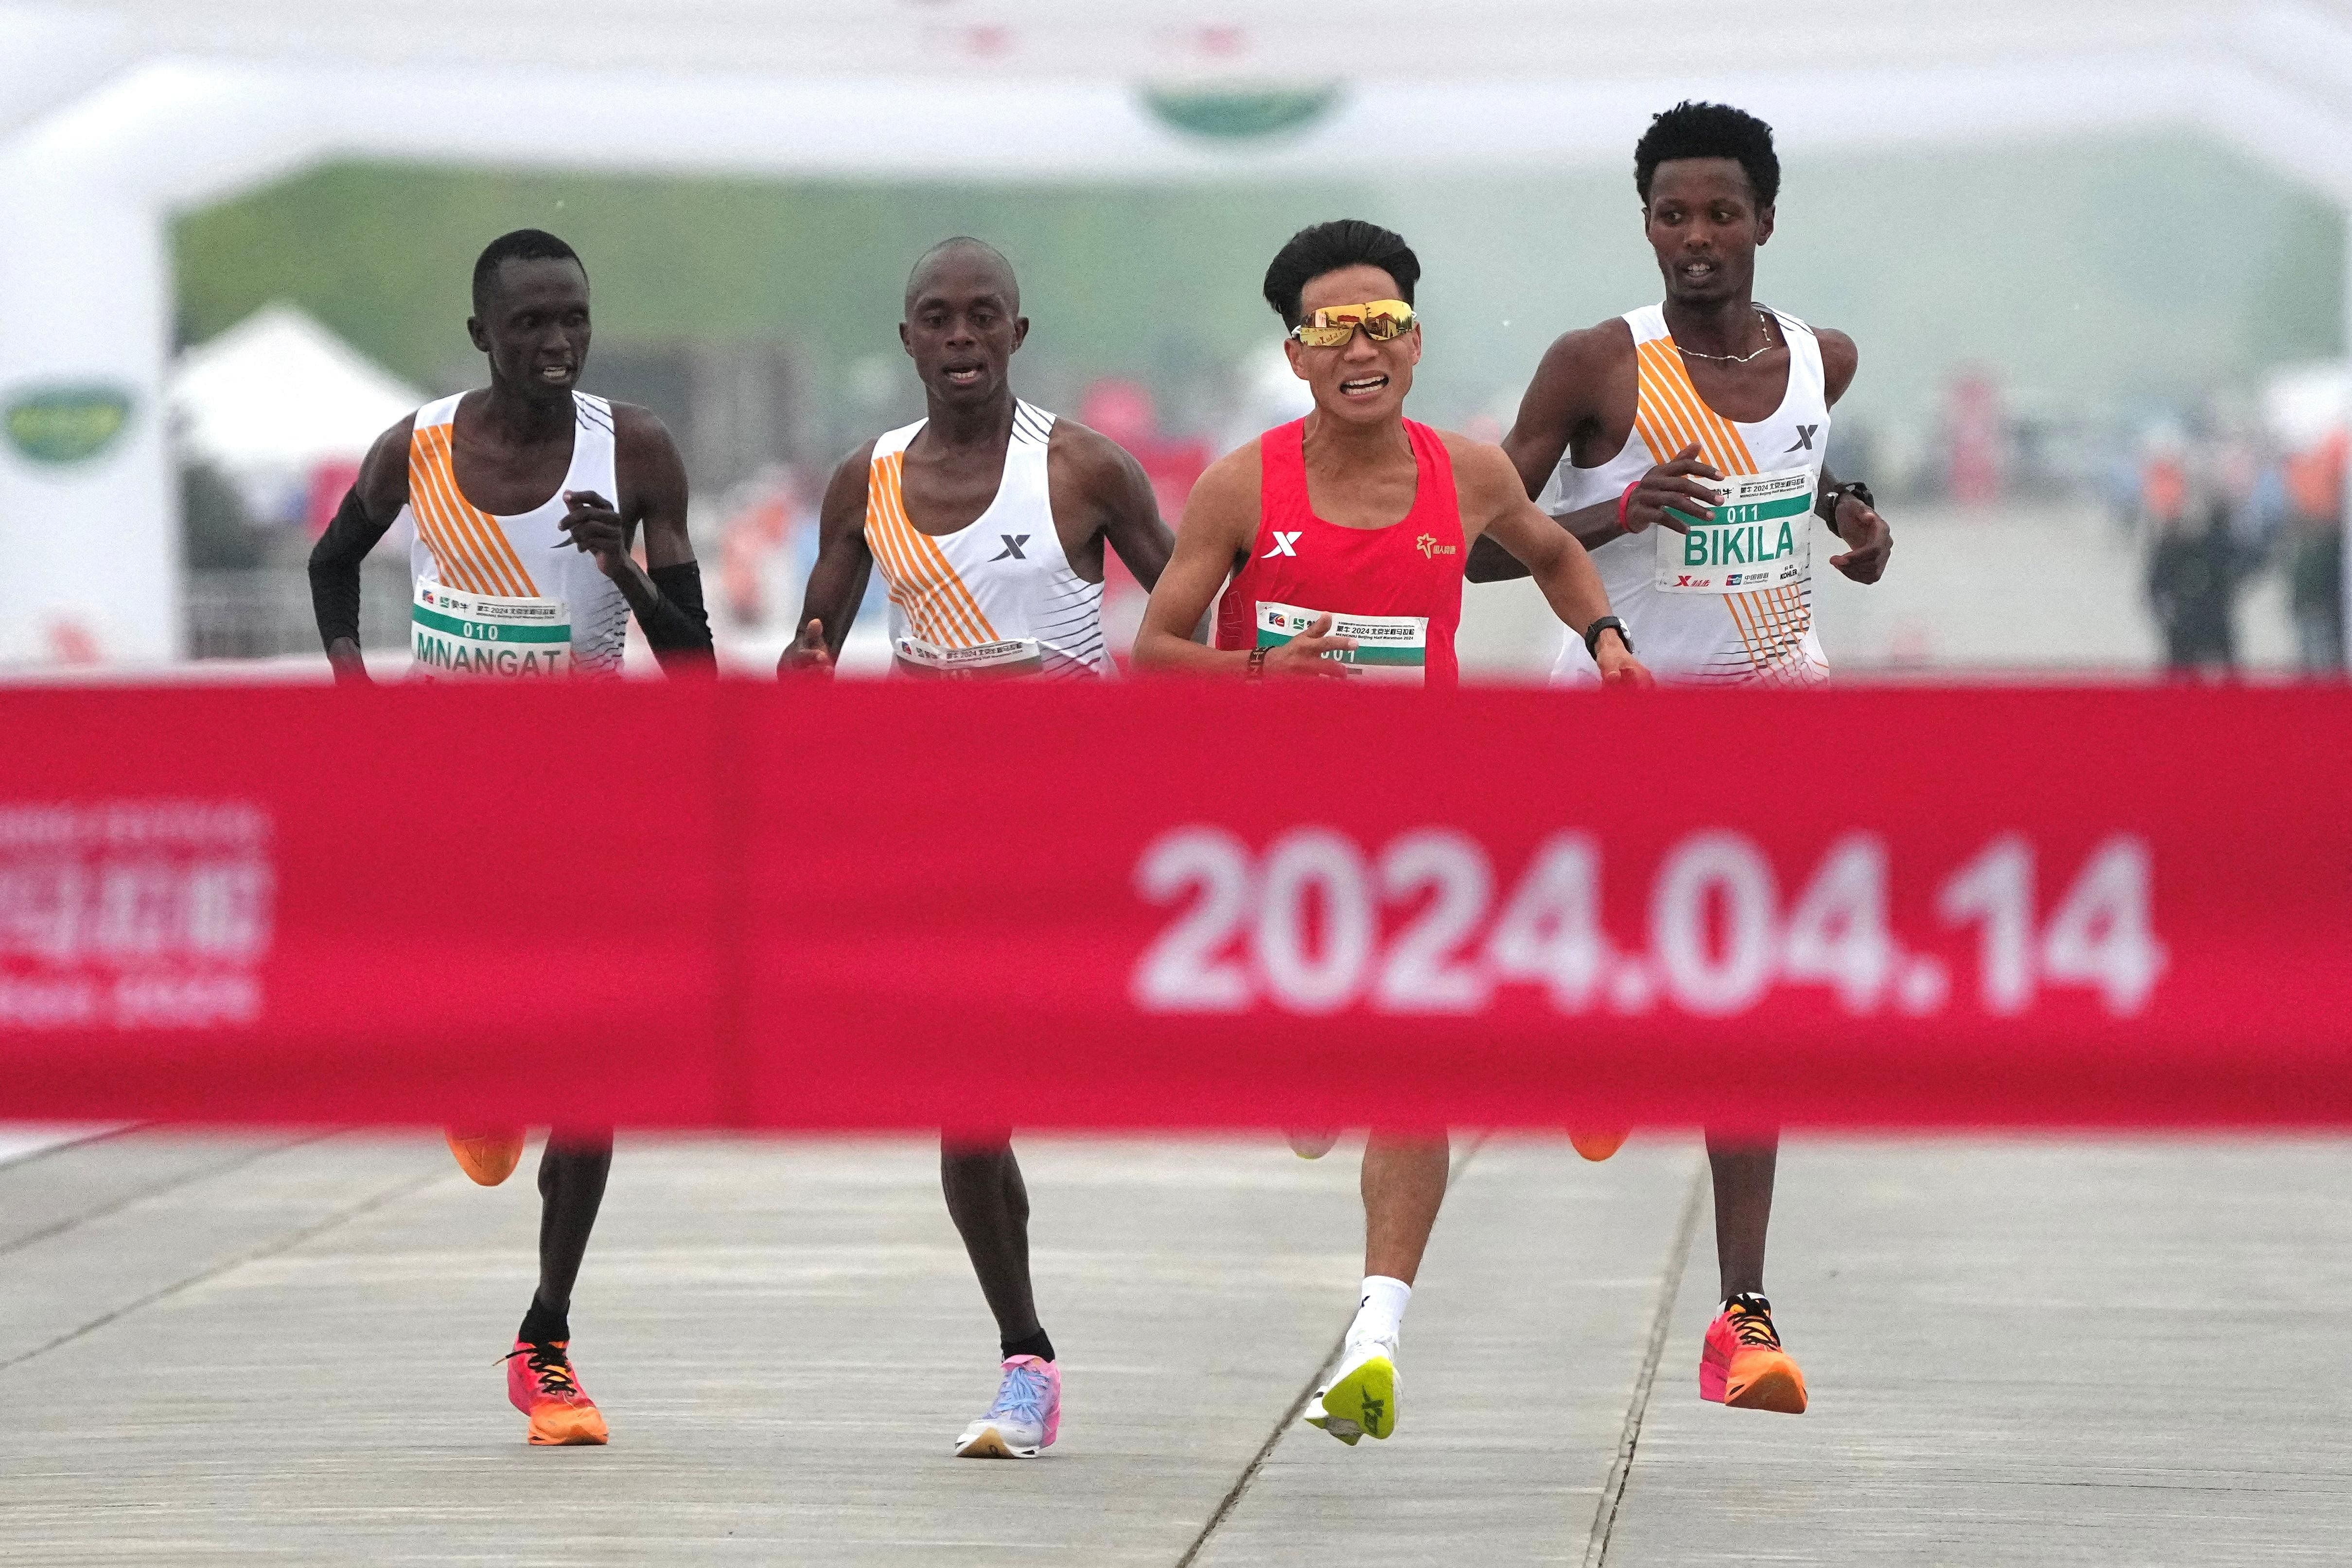 Beijing half-marathon runners stripped of medals after controversial finish